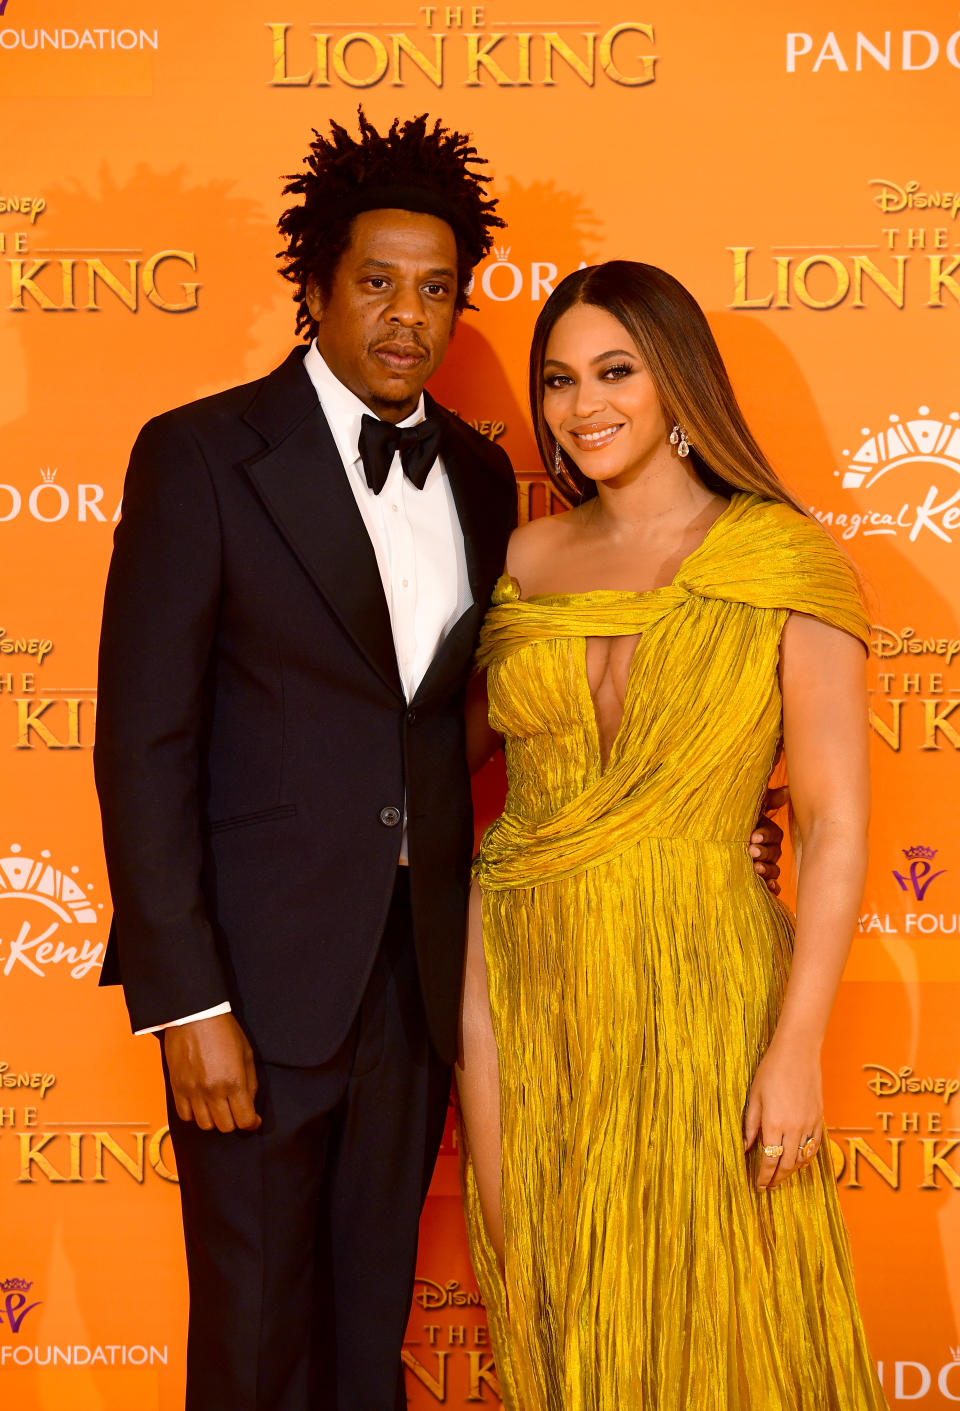 Jay-z and Beyonce attending Disney's The Lion King European Premiere held in Leicester Square, London.